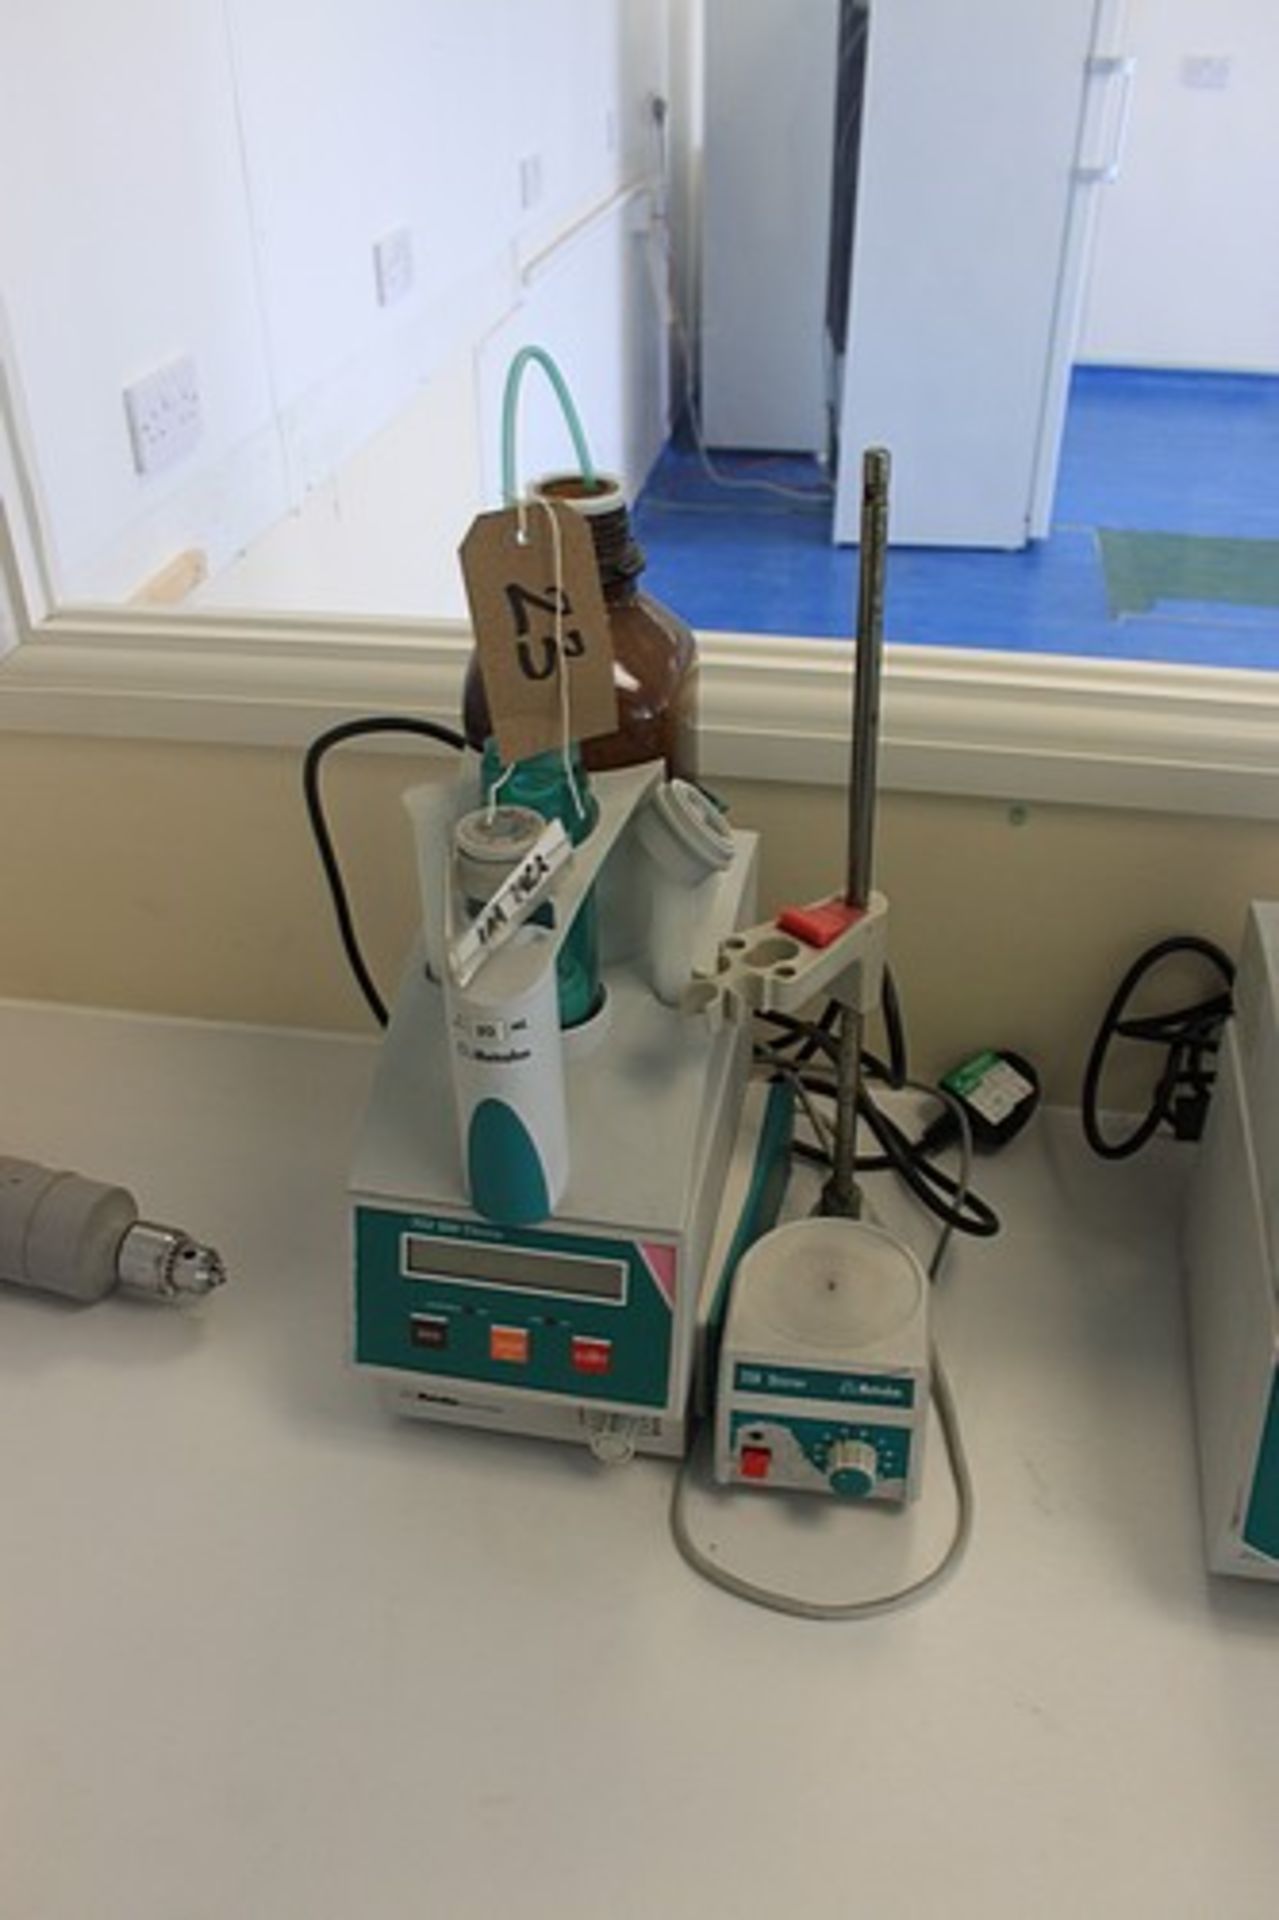 Metrohm 702 SM Titrino potentiometric titrator complete with 728 Magnetic Swing-out Stirrer with